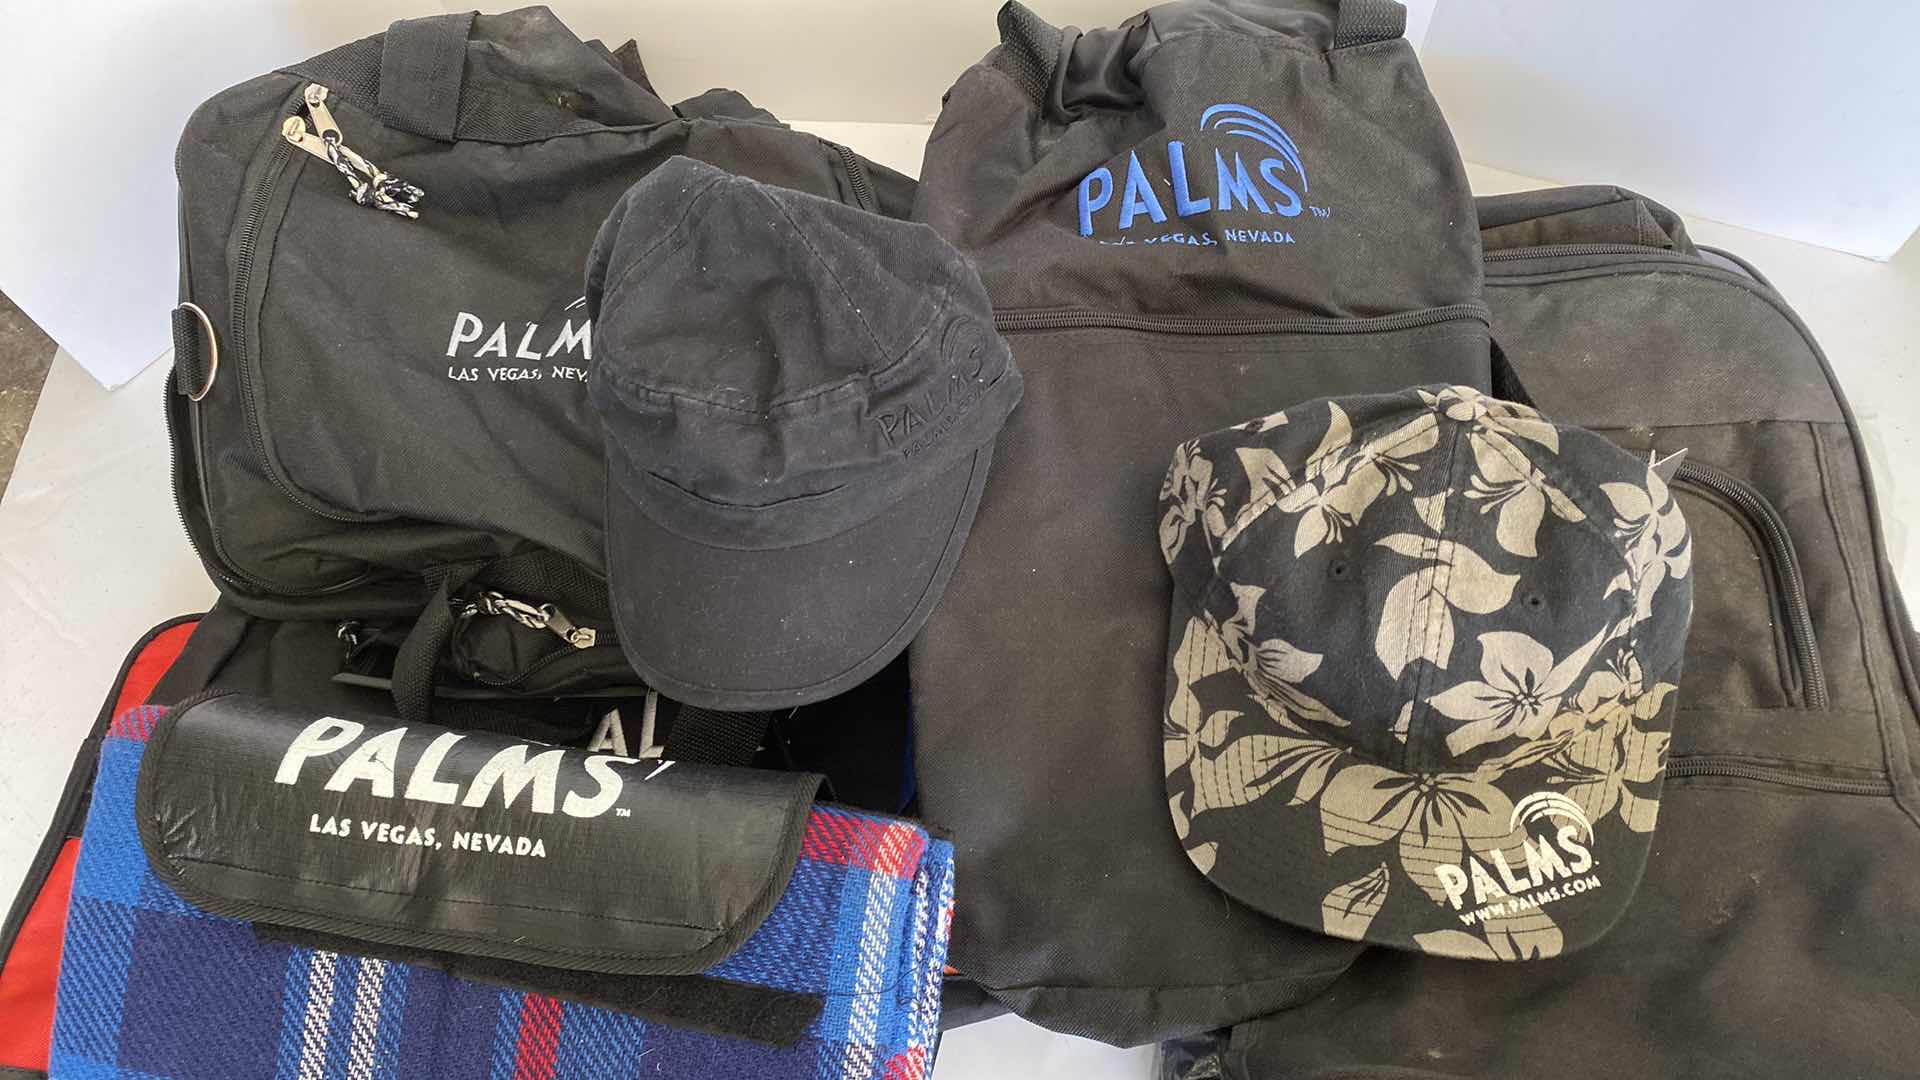 7-PALMS CASINO BAGS AND 2 HATS